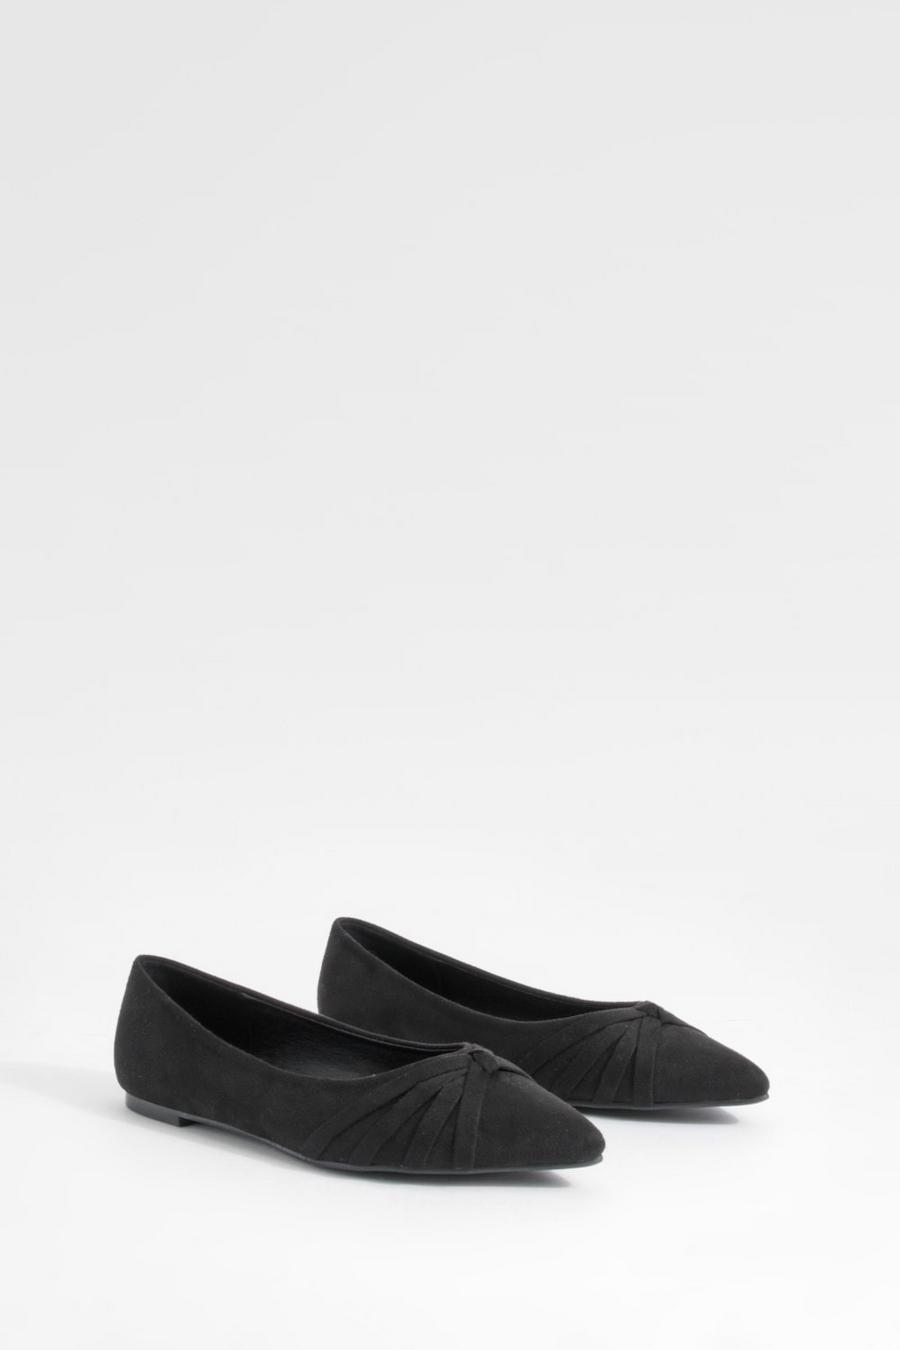 Black Wide Width Twist Front Pointed Flats